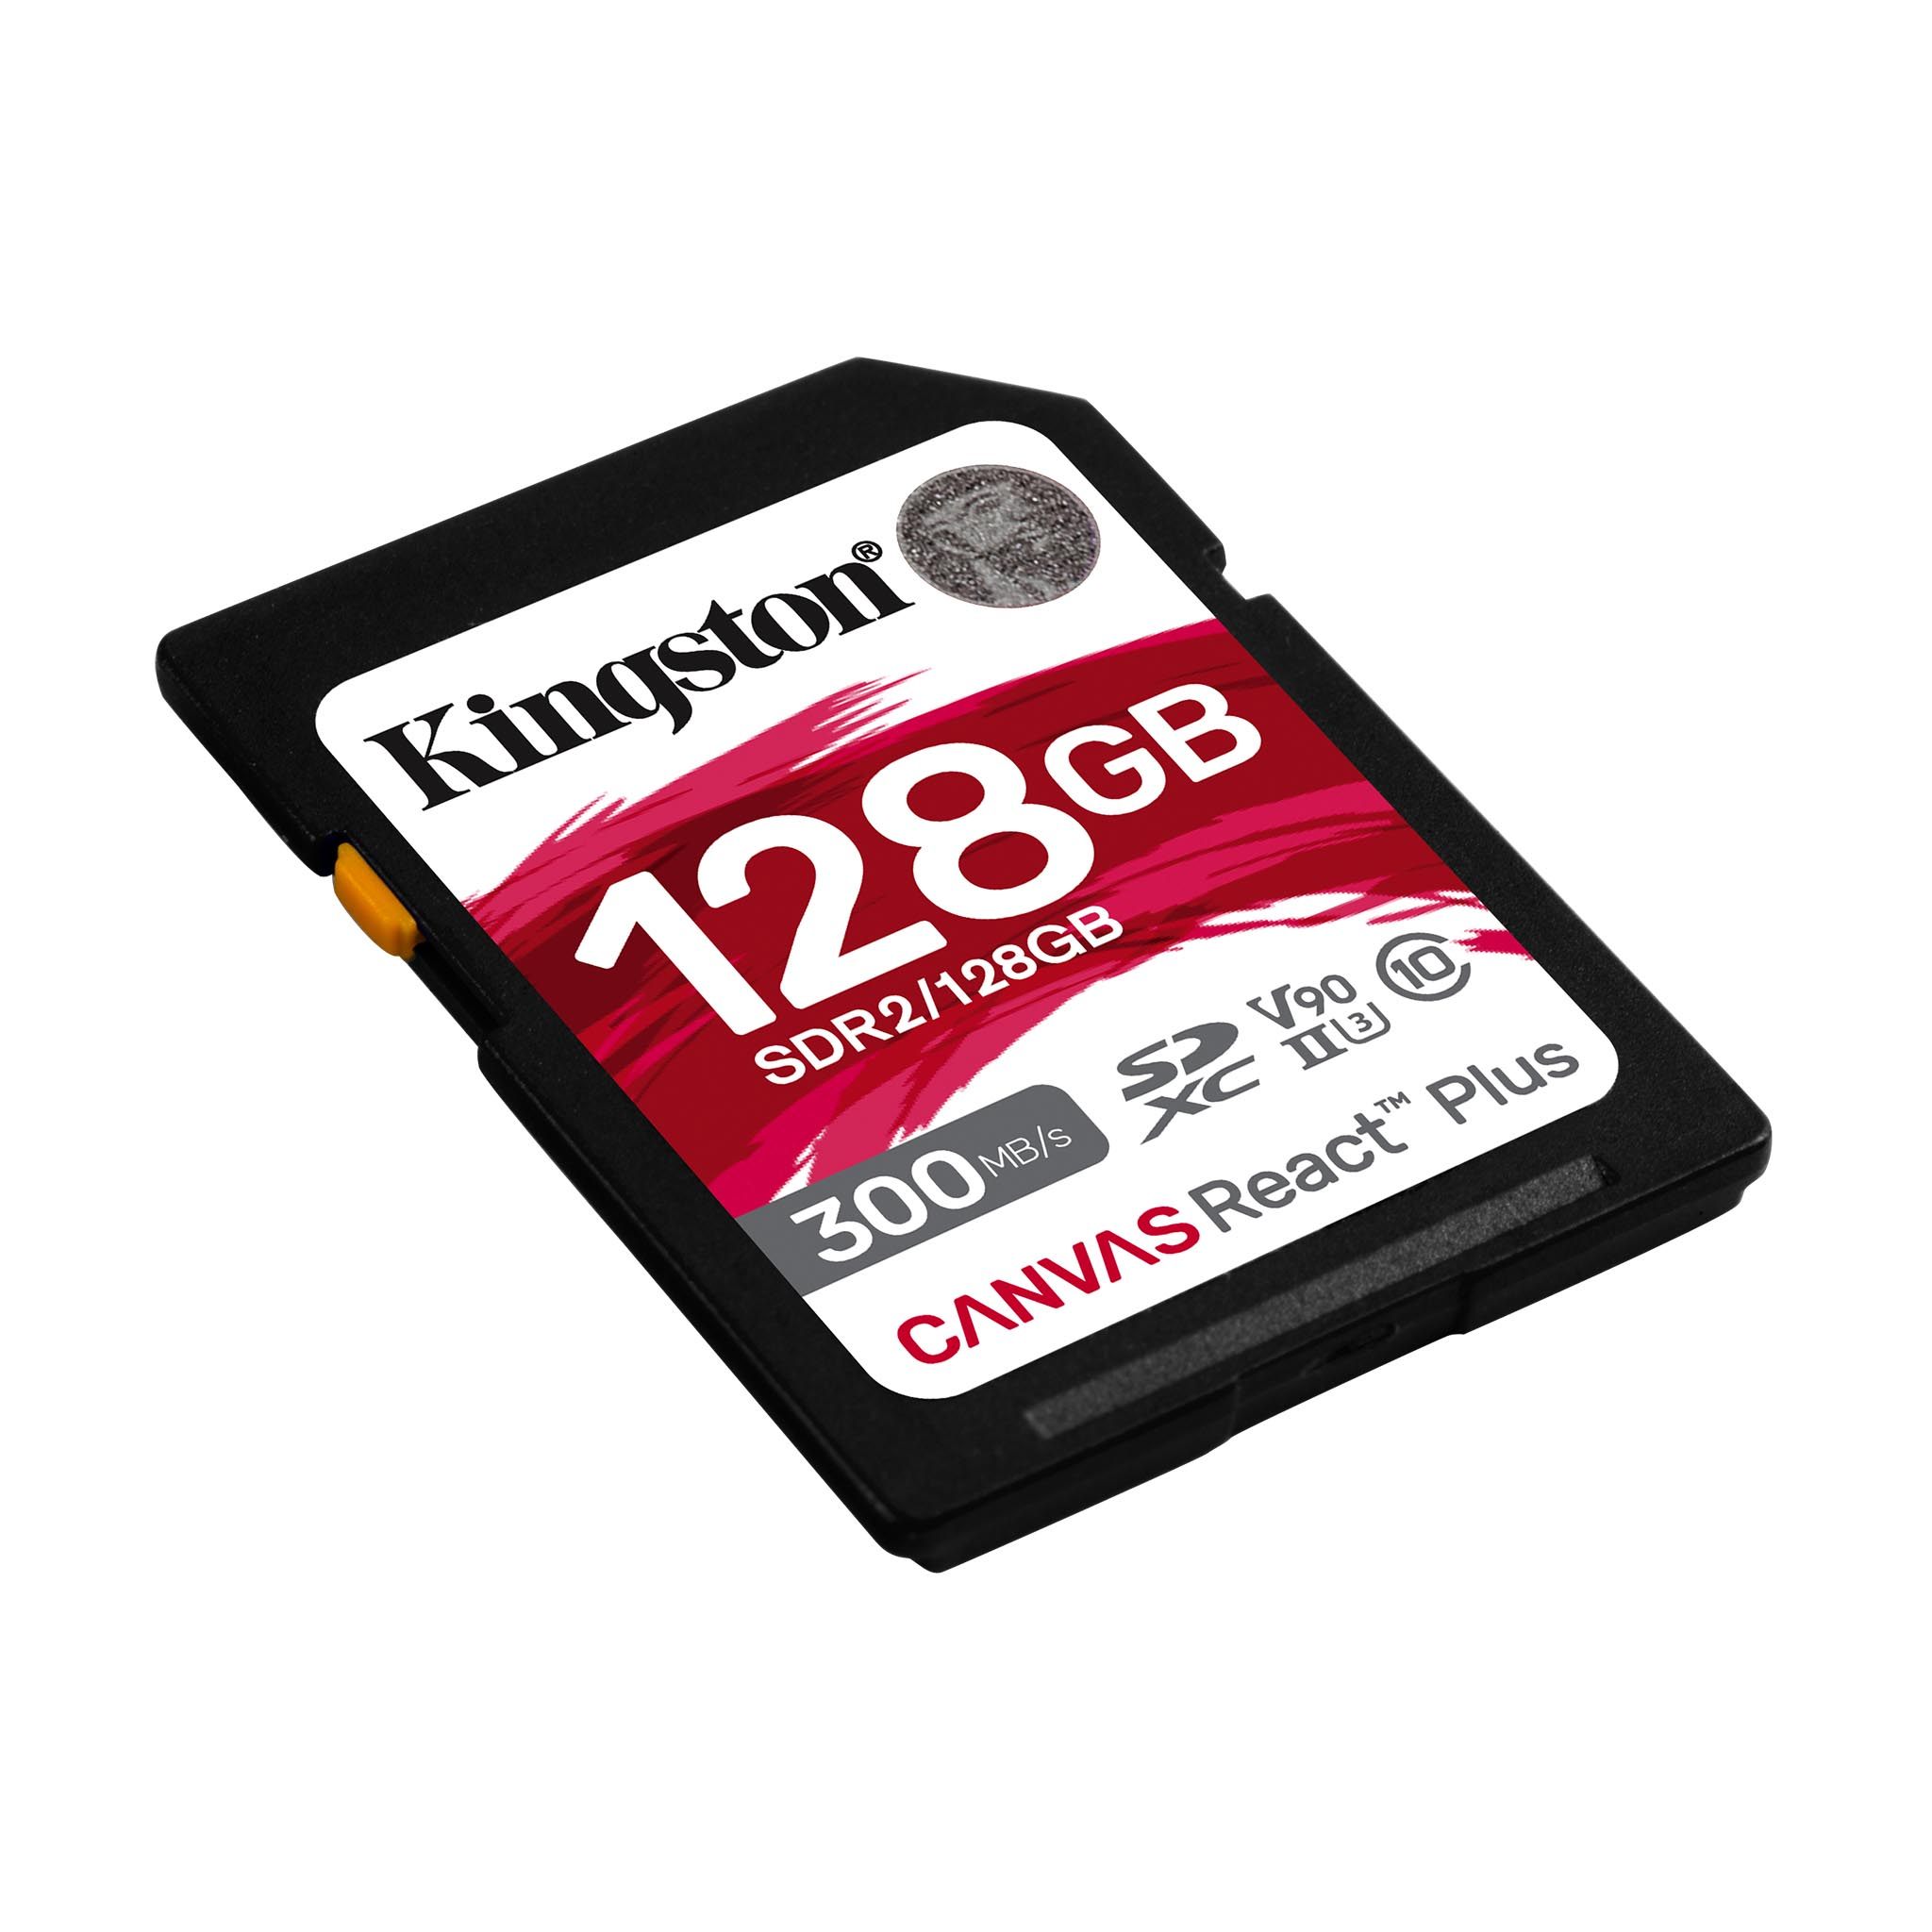 Dual 128GB SD cards 300 MB/s read, 260 MB/s write, UHS-II, U3, V90 (with backup)